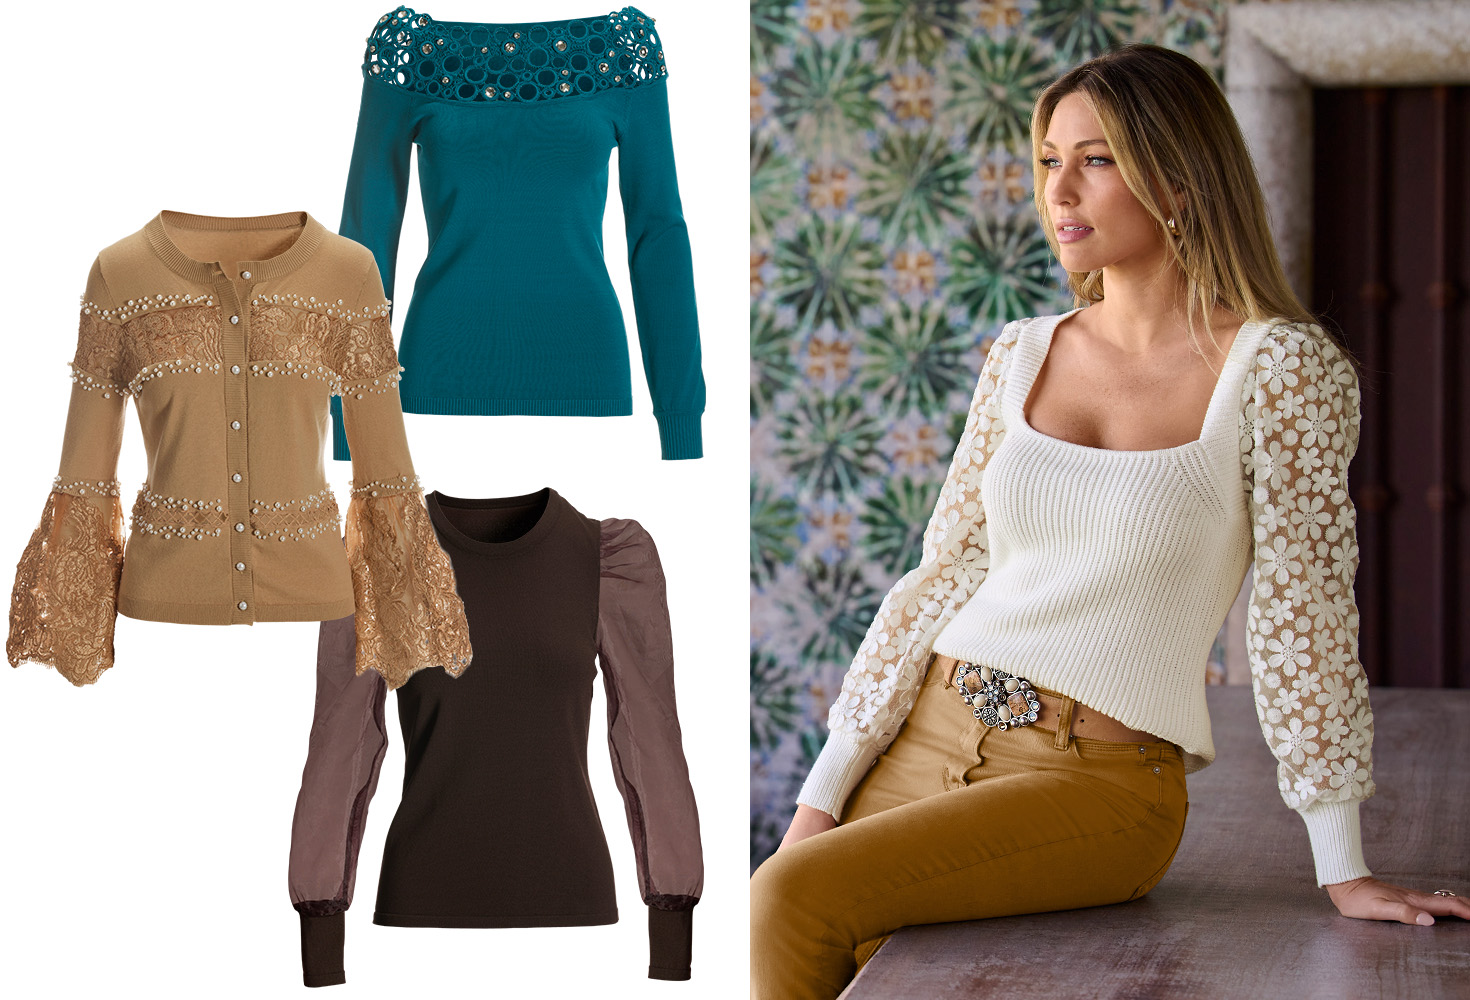 left side shows a light brown lace and pearl embellished flare sleeve cardigan, a teal jewel embellished off-the-shoulder sweater, and a brown organza puff-sleeve sweater. right model wearing a white ribbed sweater with floral lace sleeves, jeweled brown belt, and light brown jeans.